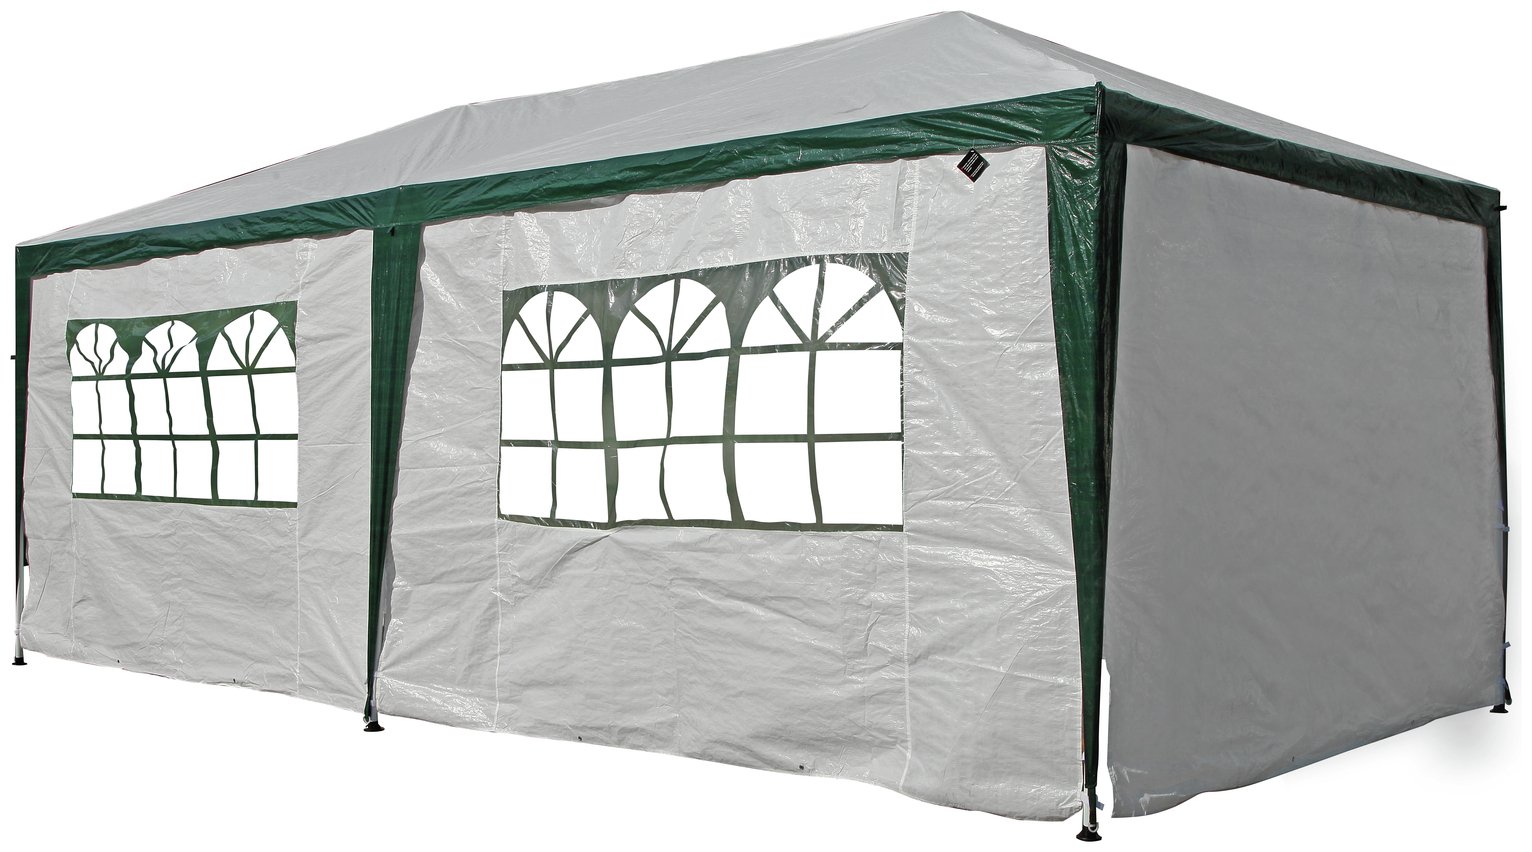 Argos Home 3m x 6m Gazebo with Weather Resistant Side Panels